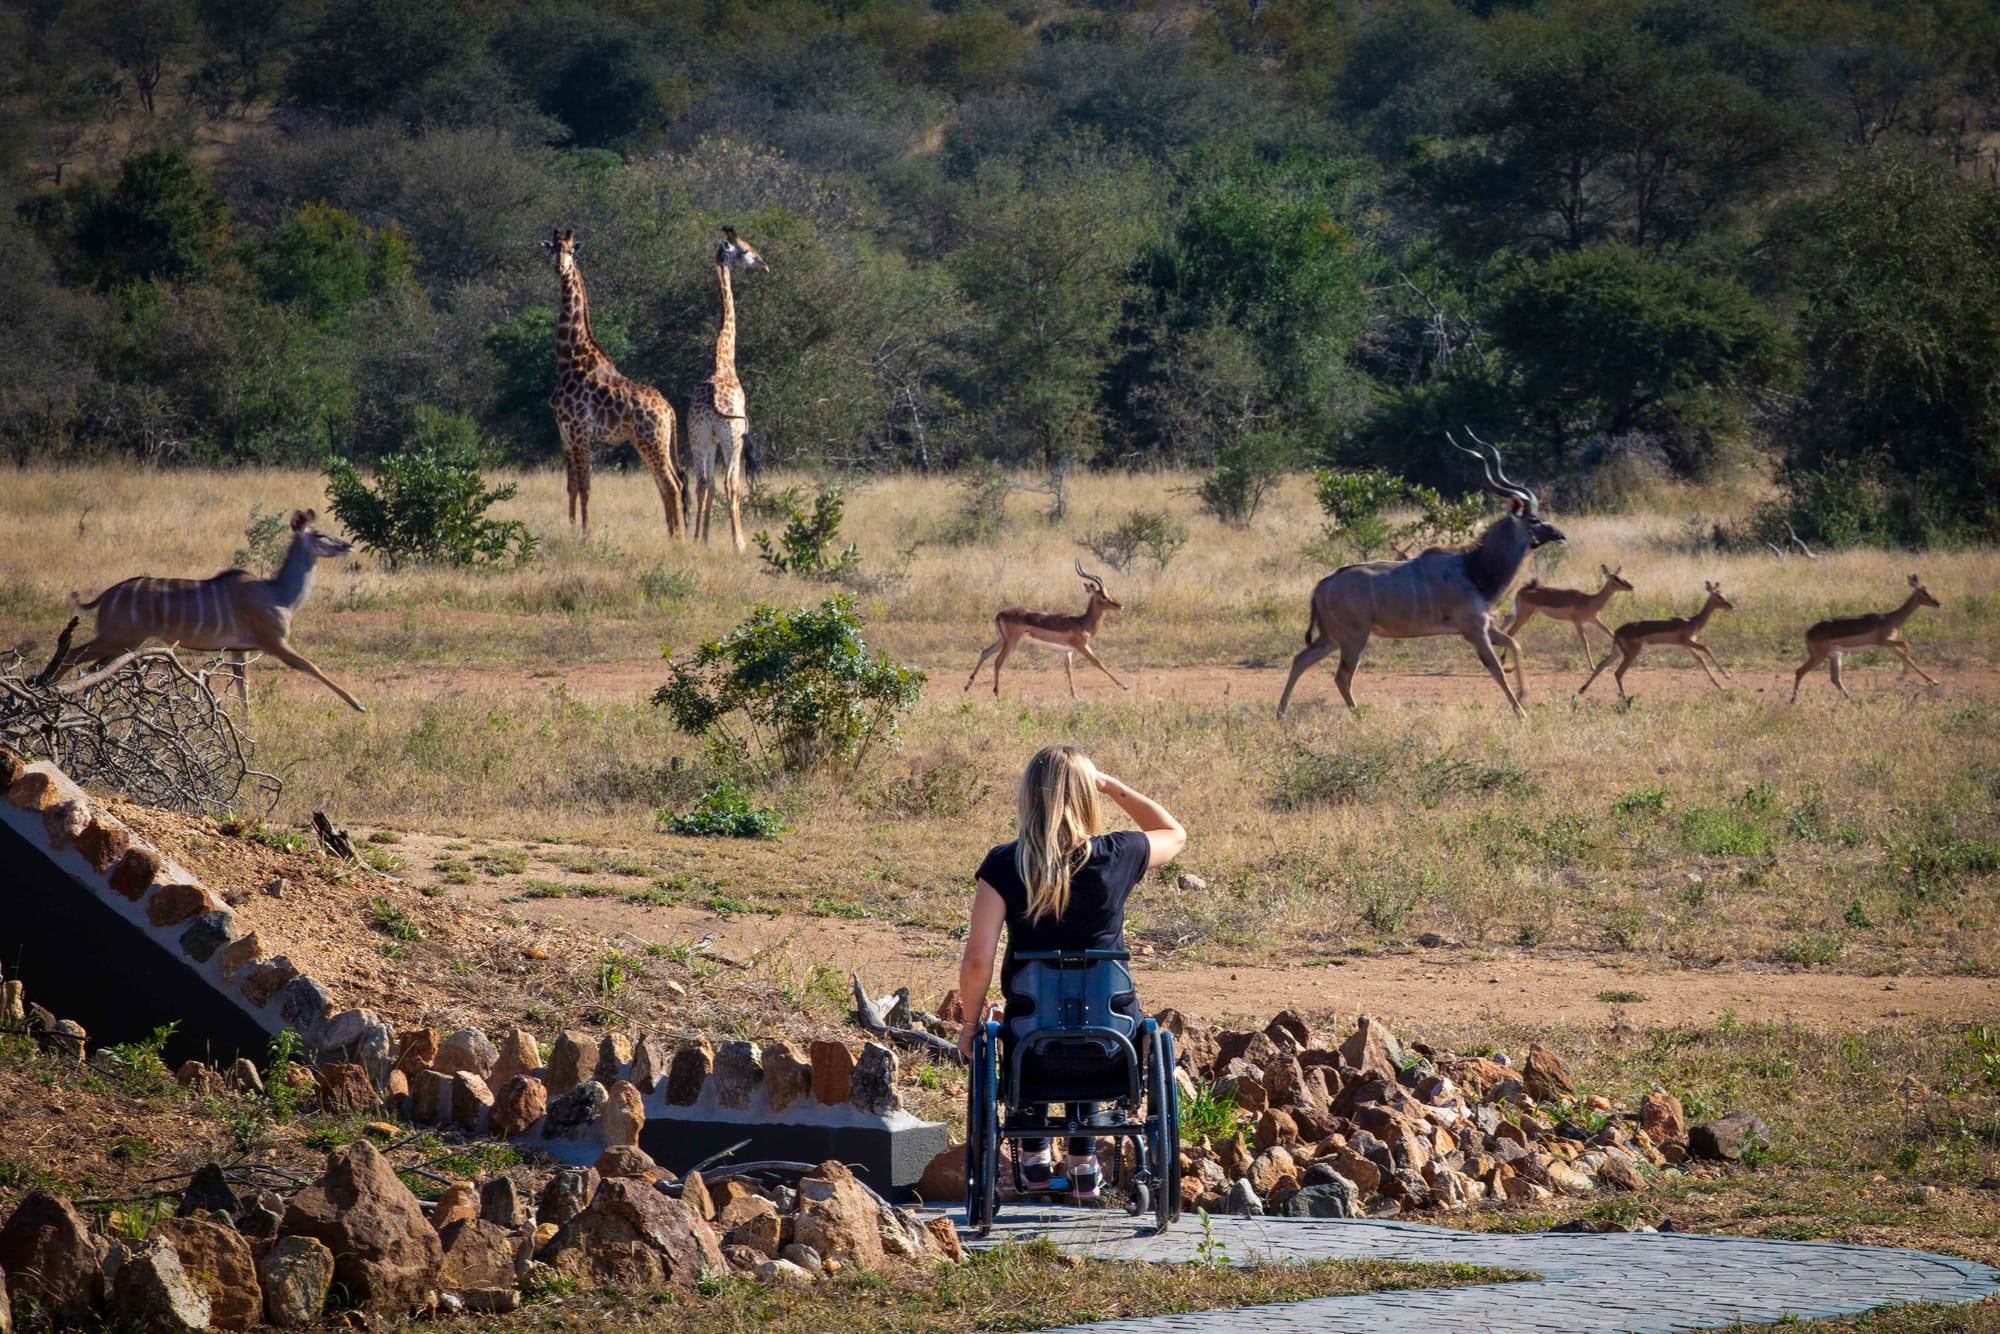 Sophie Morgan watching the wildlife on an accessible safari in South Africa